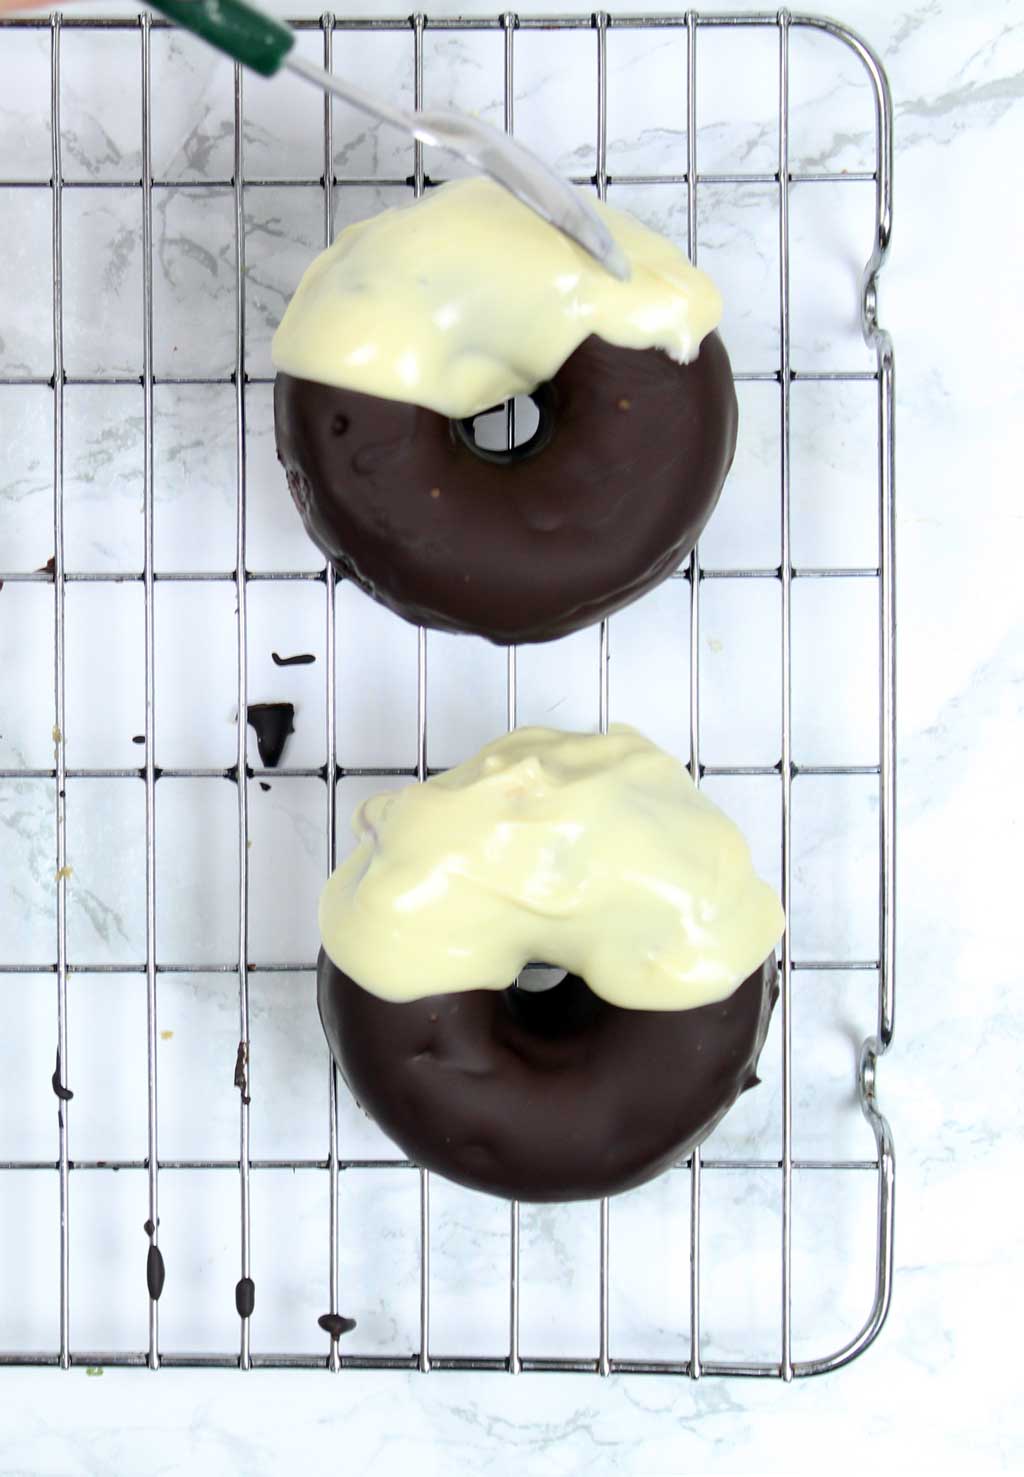 spooning white chocolate onto the donuts